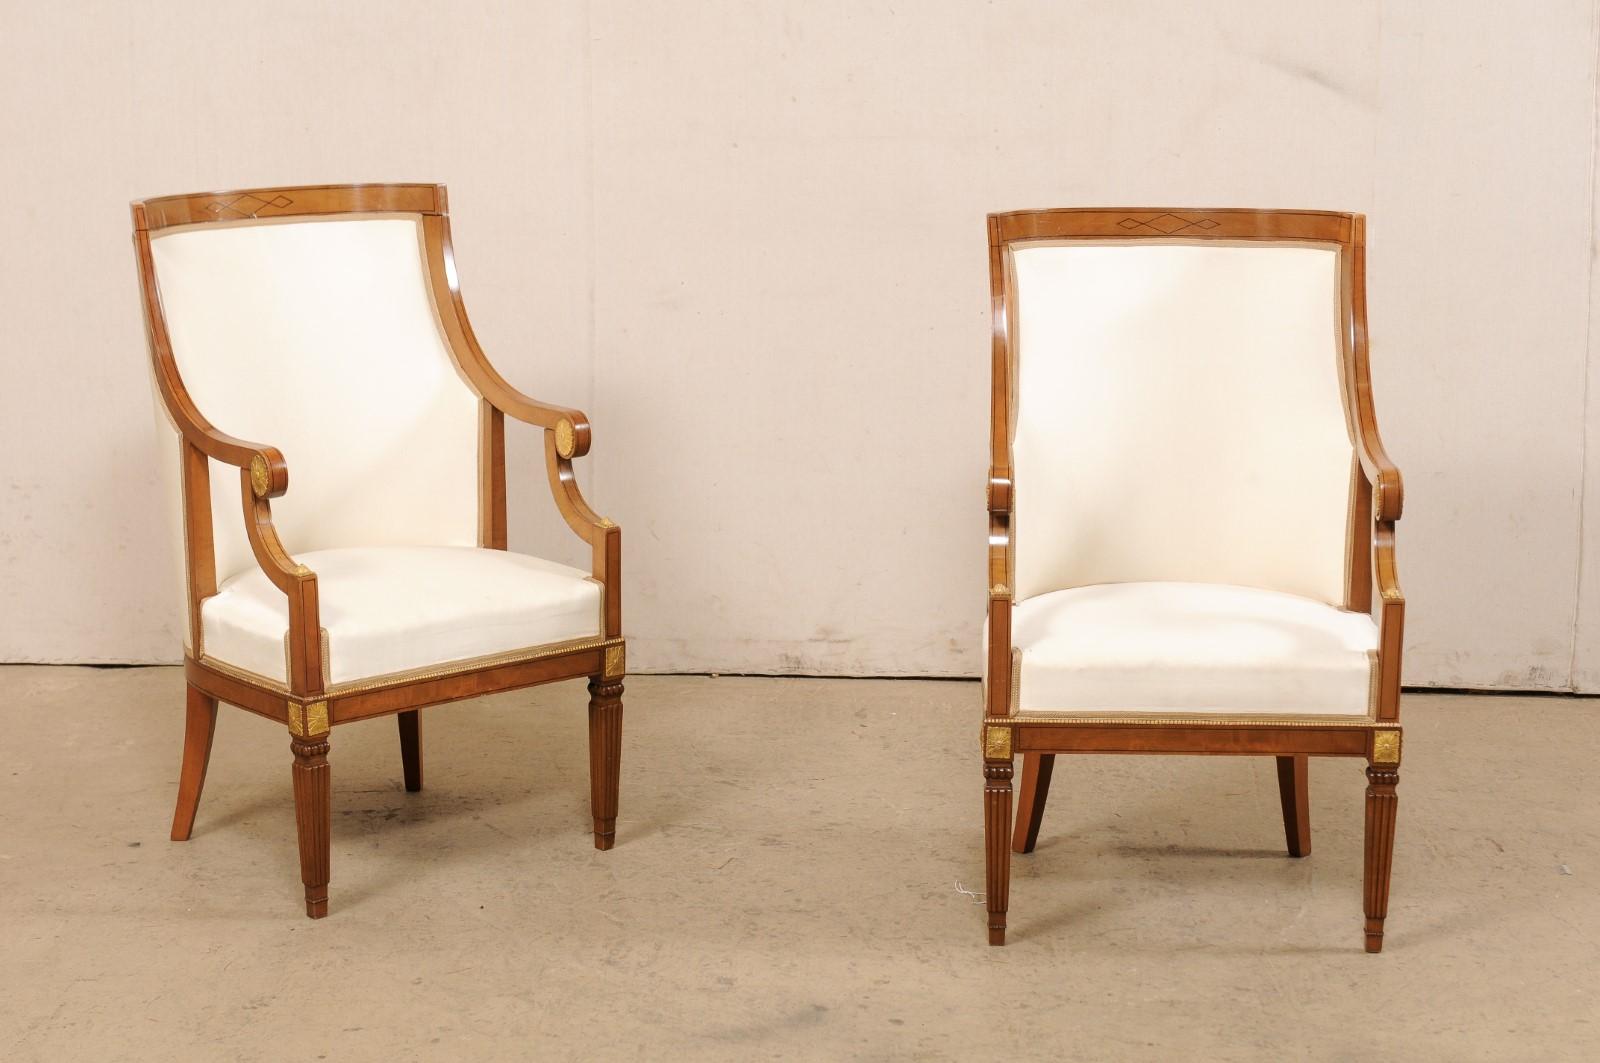 Upholstery Italian Pair of Barrel-Back Carved-Wood & Upholstered Armchairs Mid-20th Century For Sale